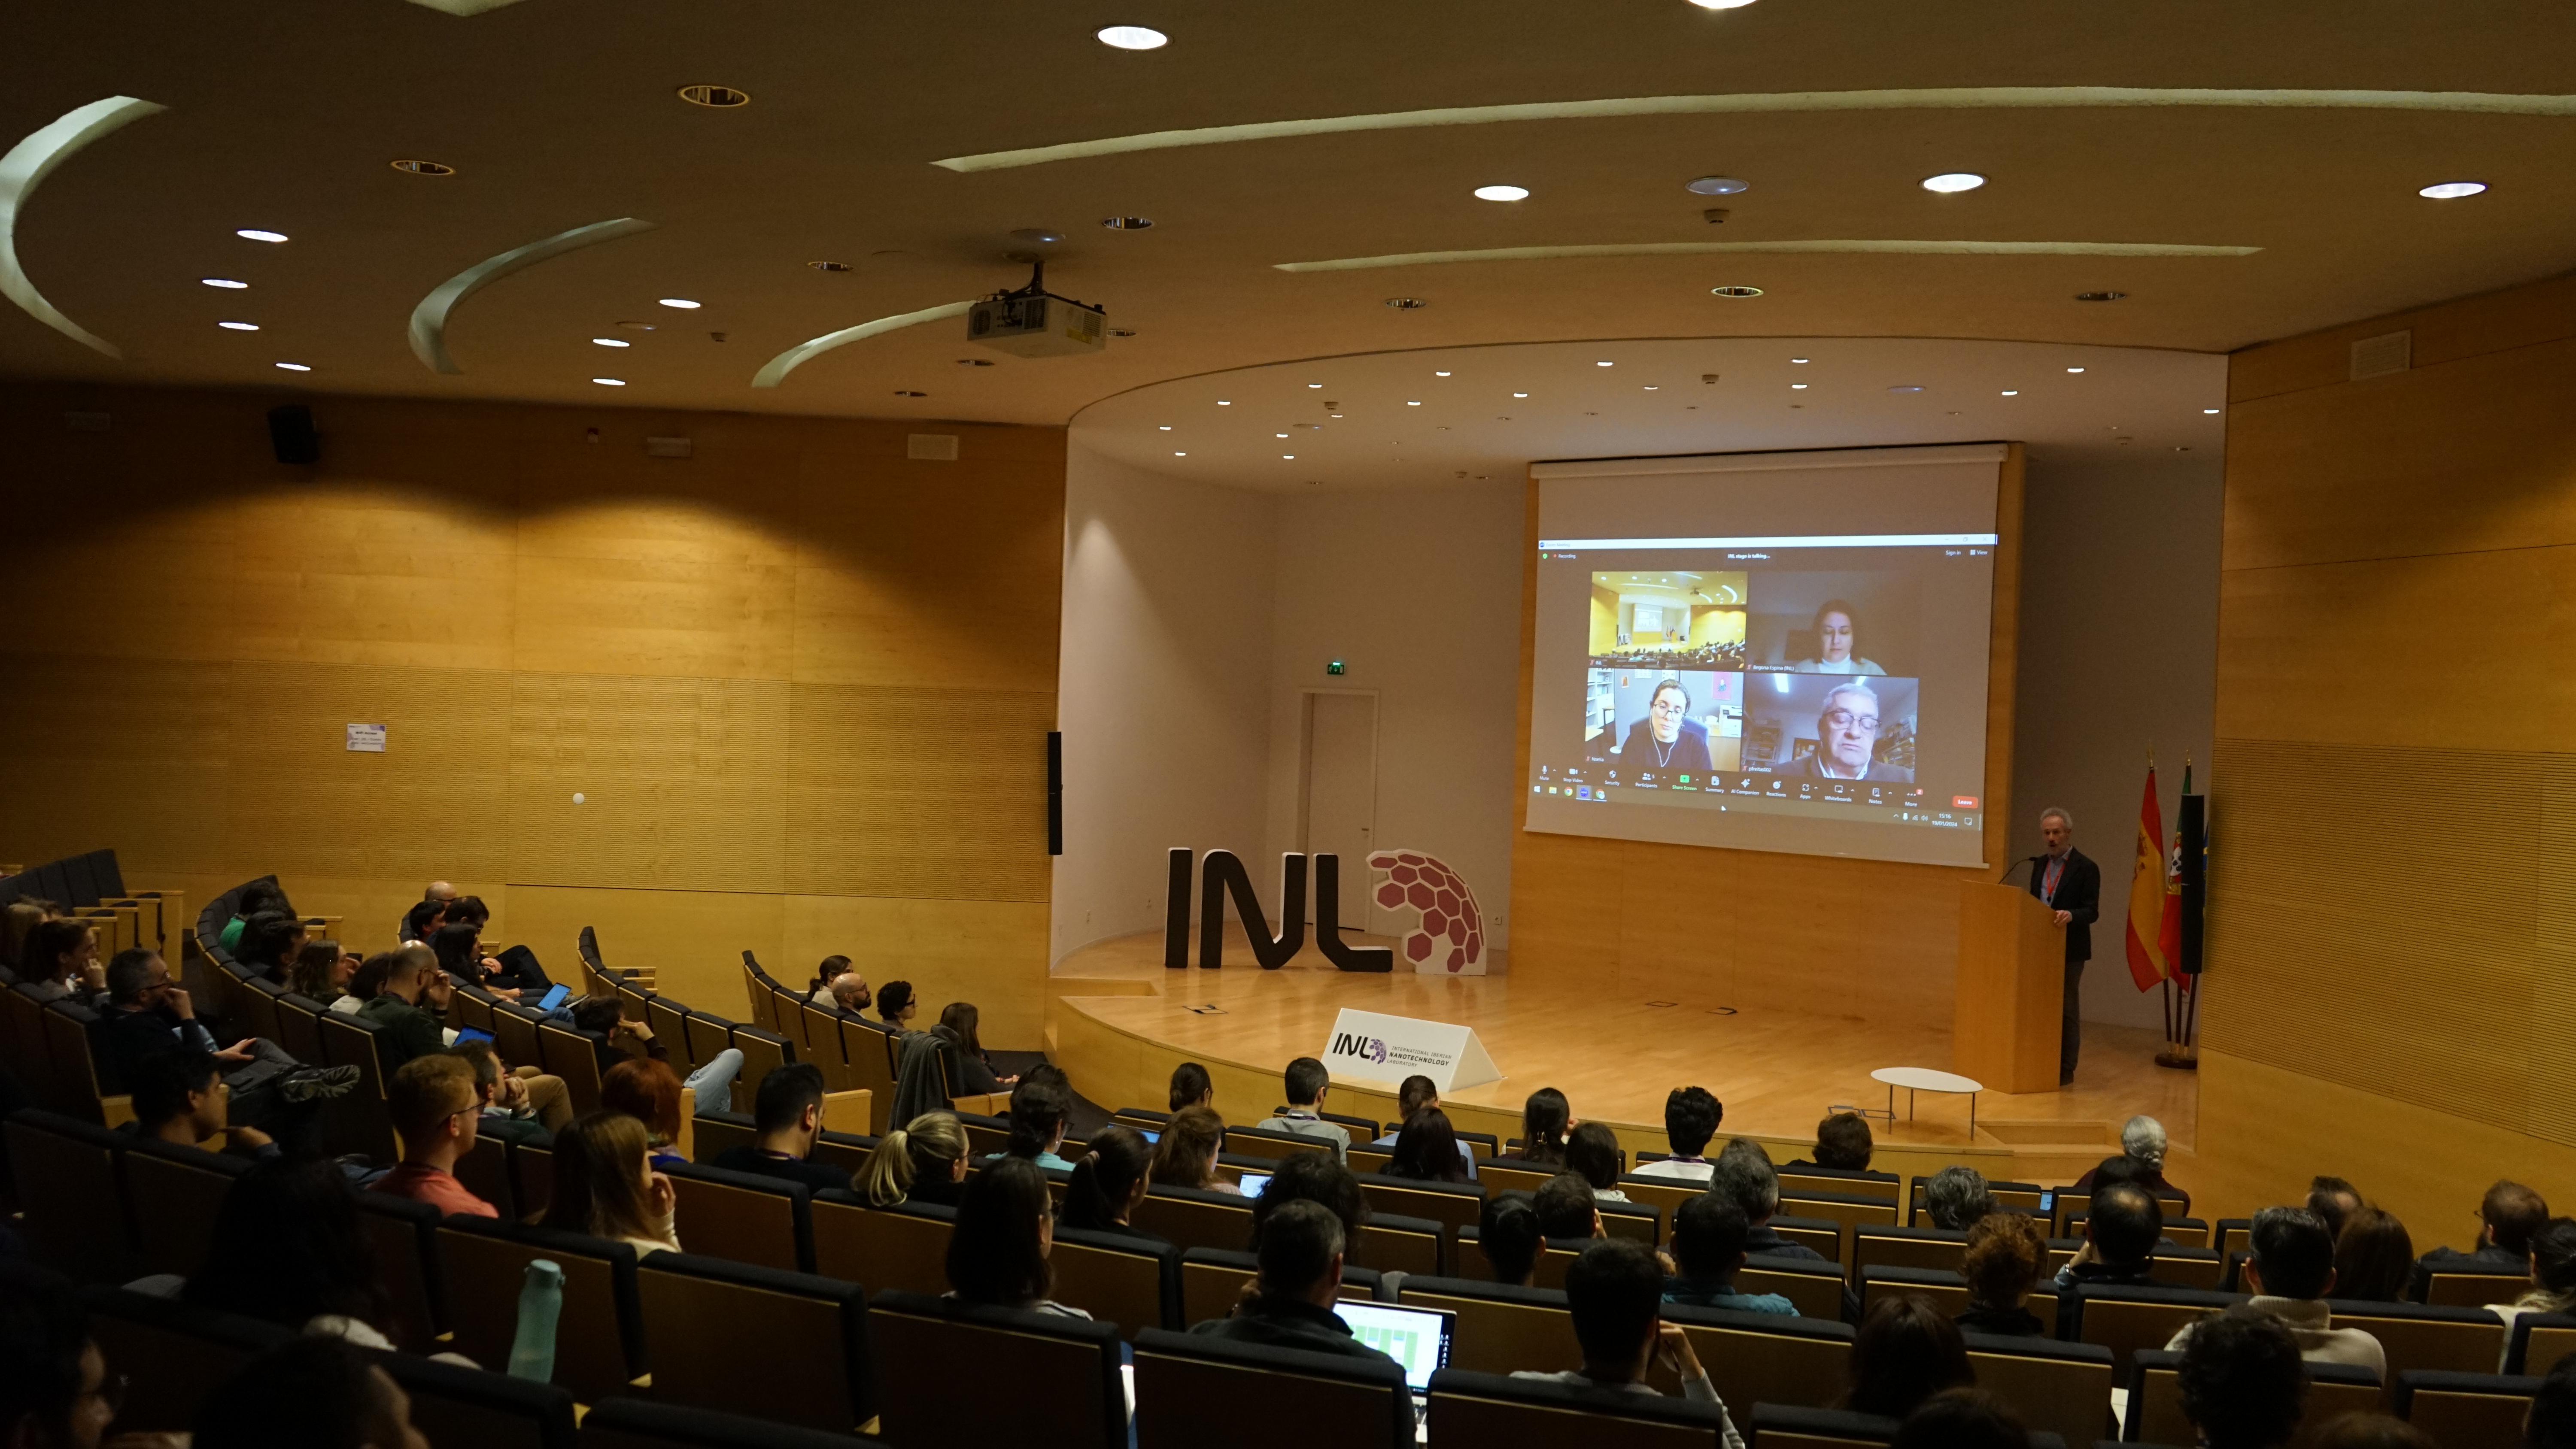 INL REC – Research Ethics Committee – was presented to the INL community